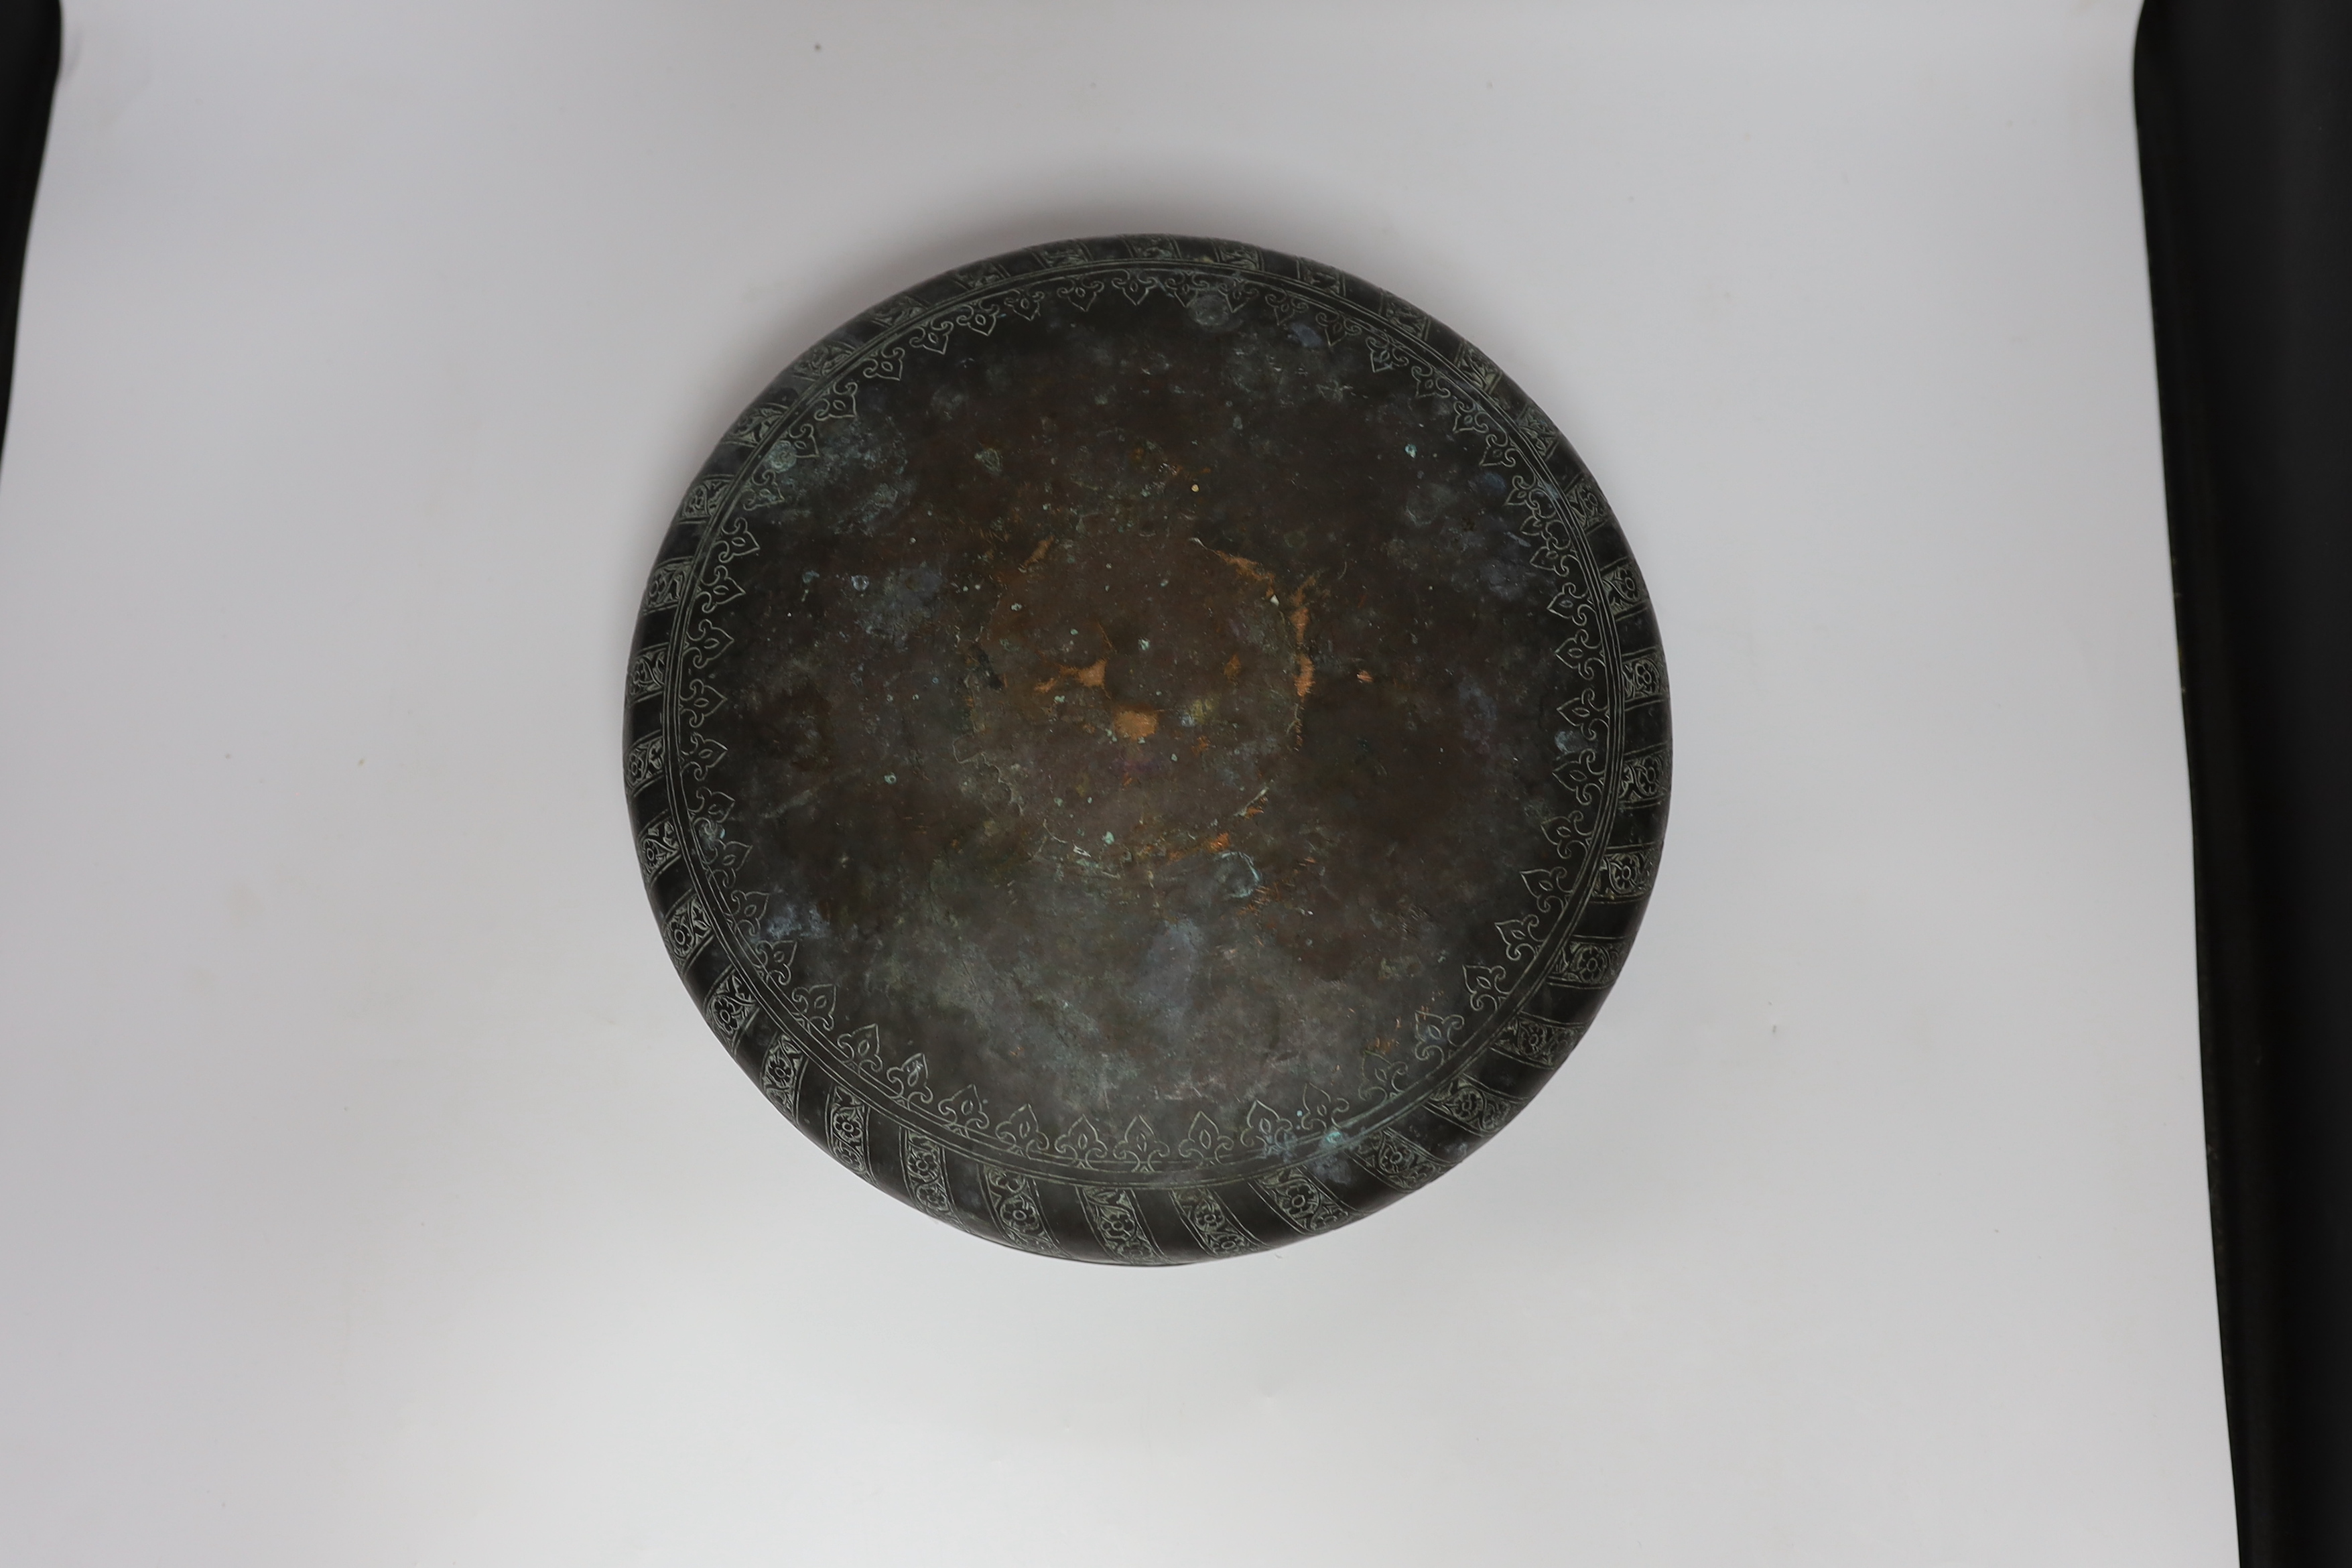 A Middle Eastern patinated copper bowl, 32cm diameter